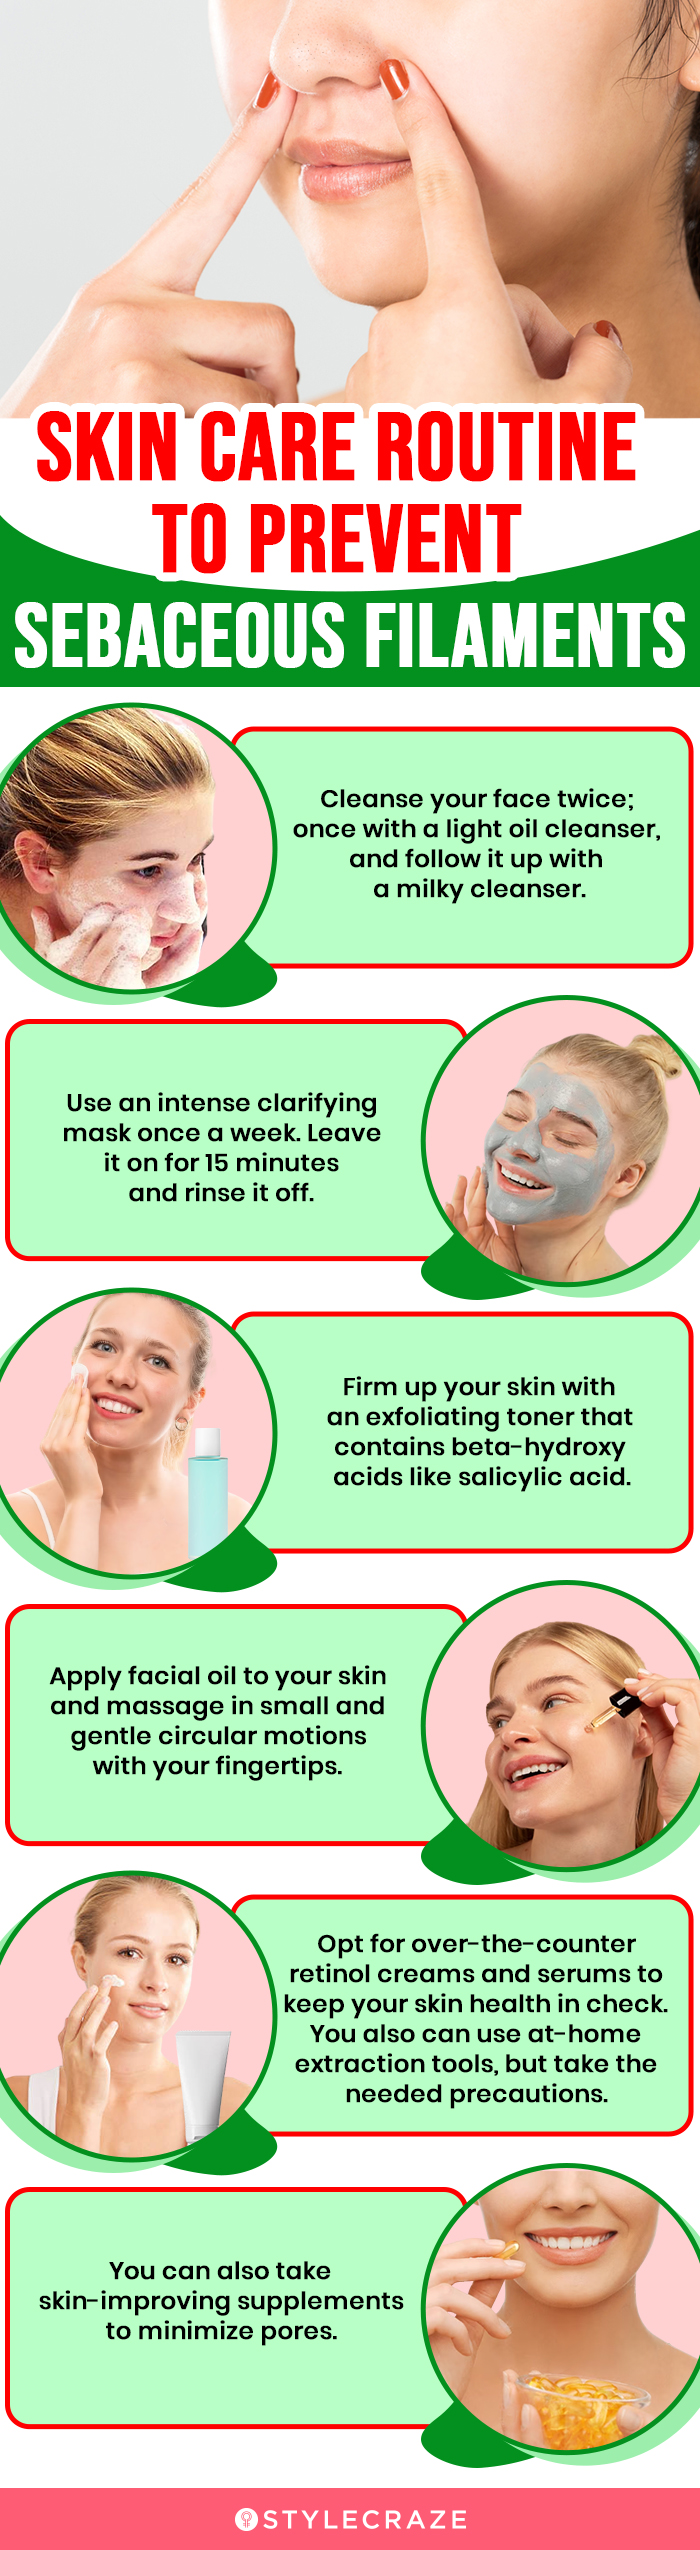 skin care routine to prevent sebaceous filaments (infographic)